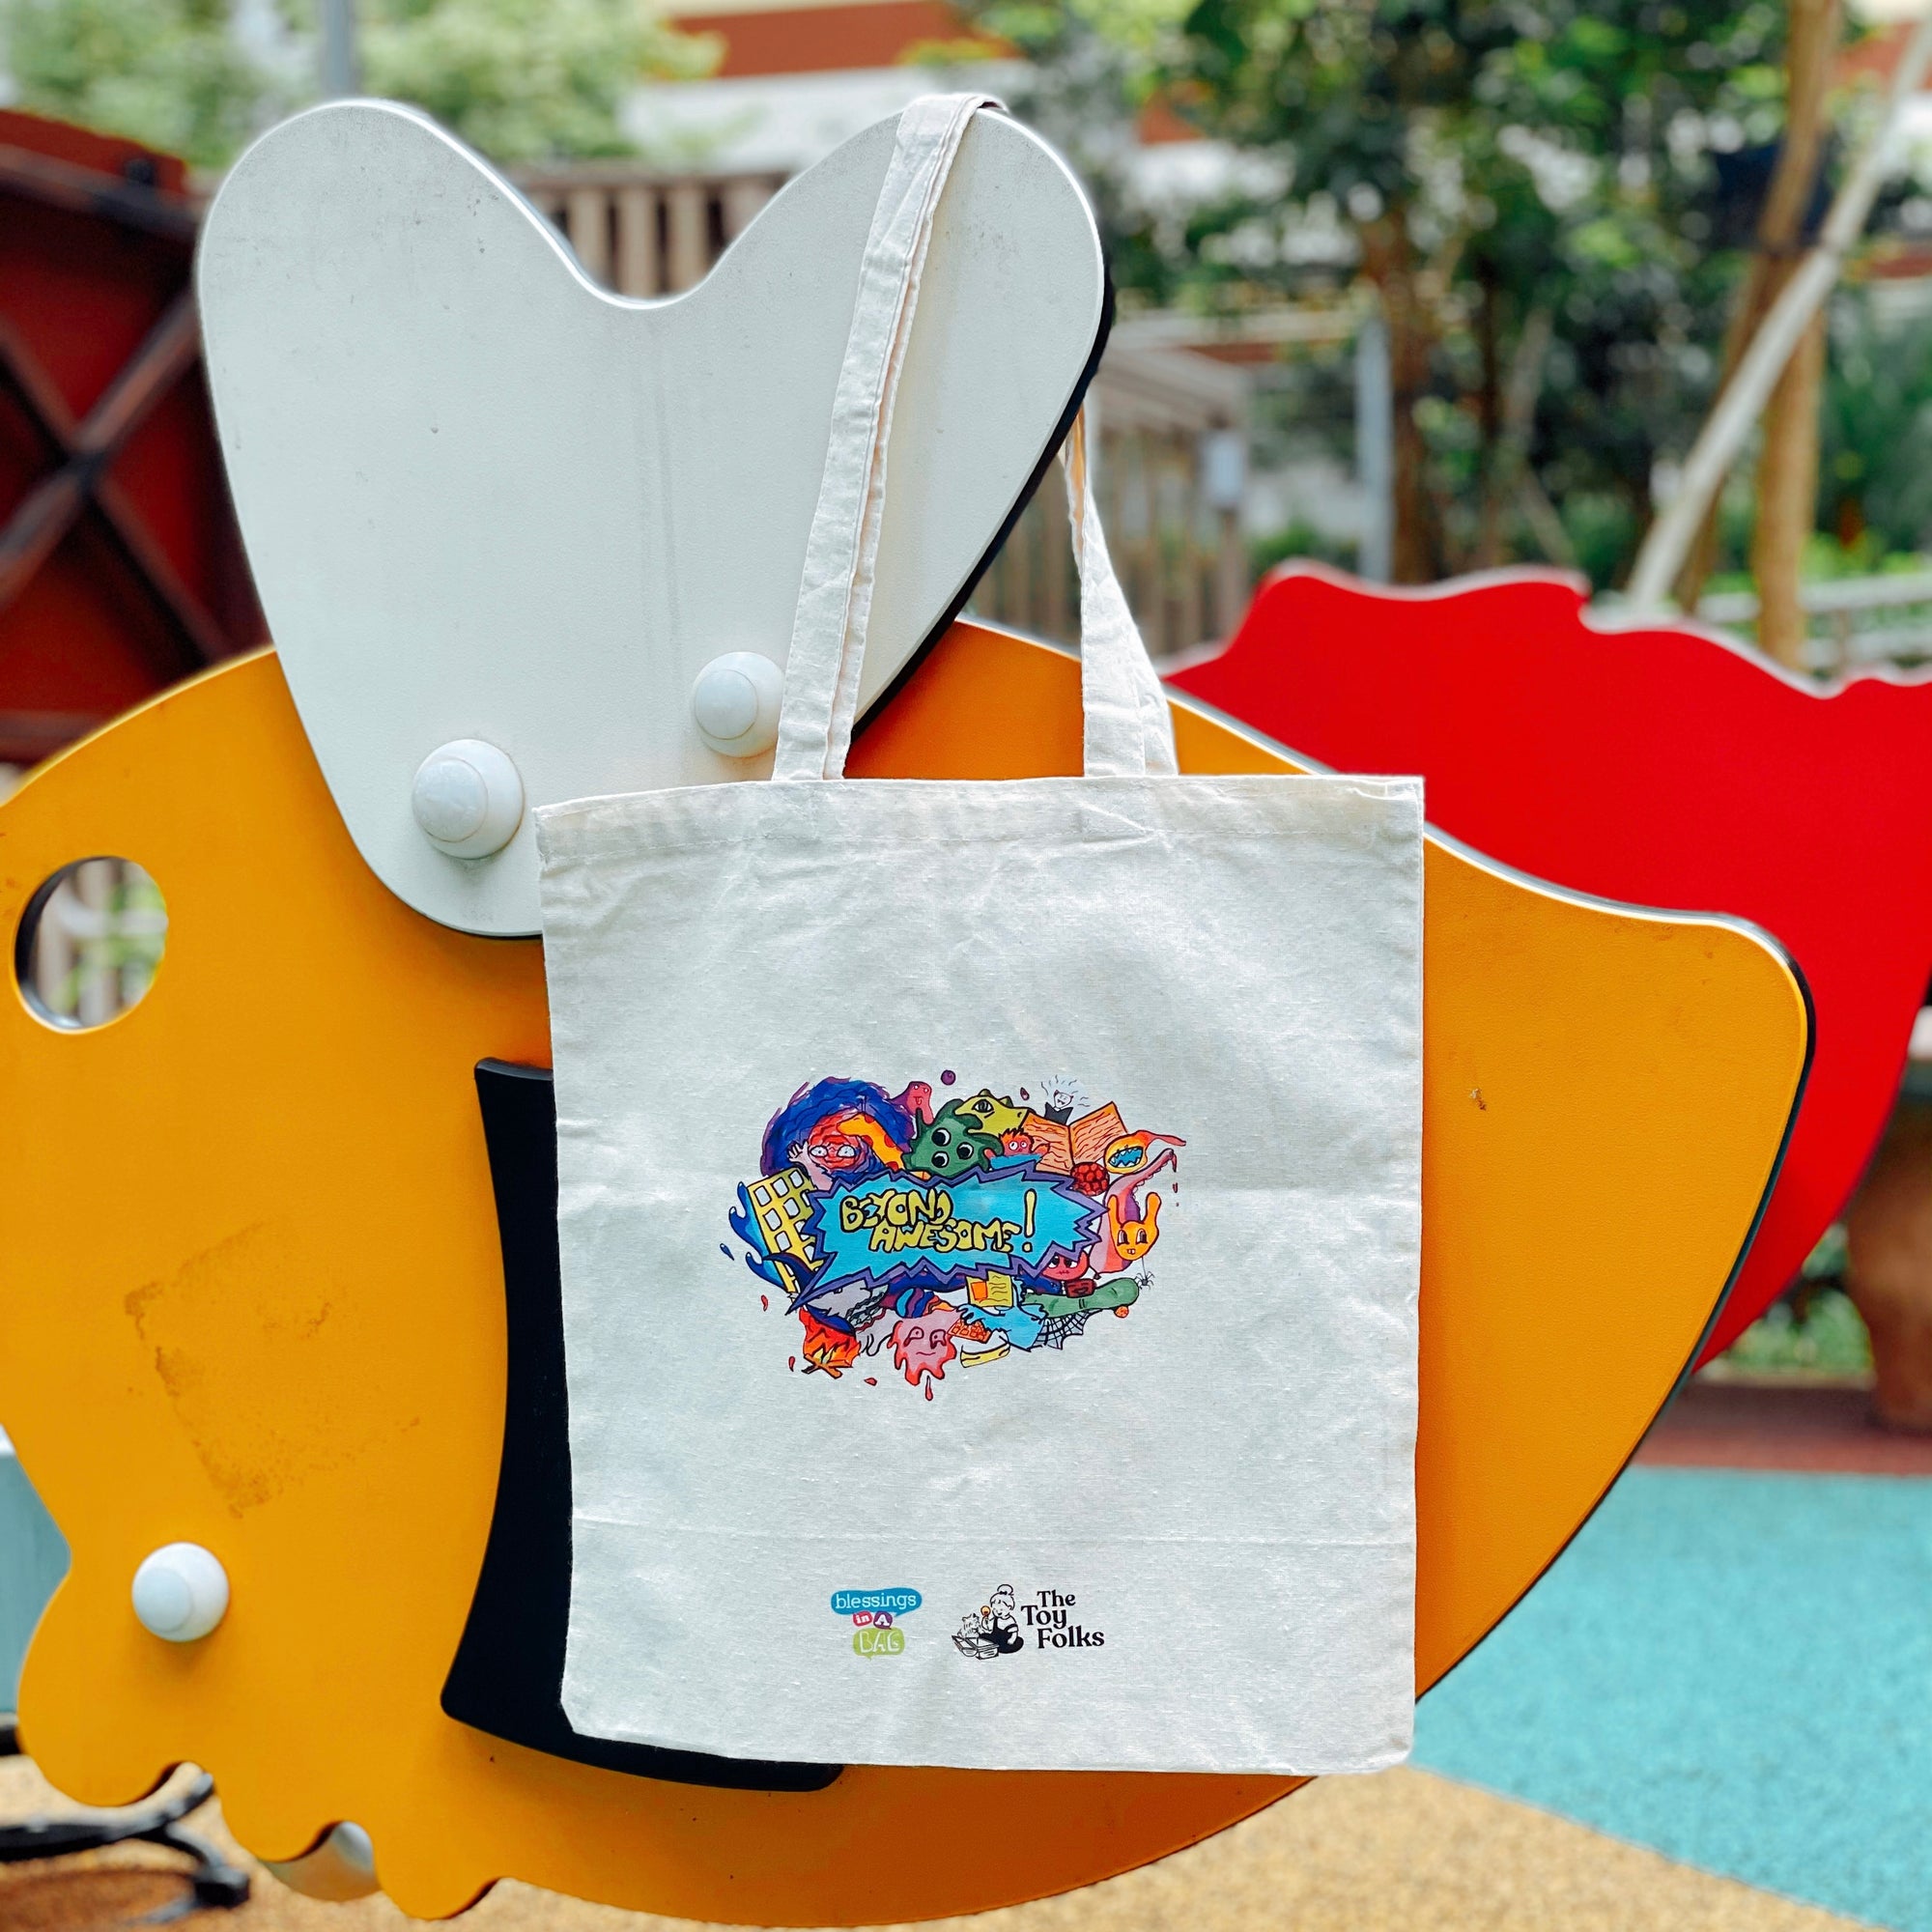 The Toy Folks x Blessings In A Bag Fundraiser Eco-Friendly Tote Bag